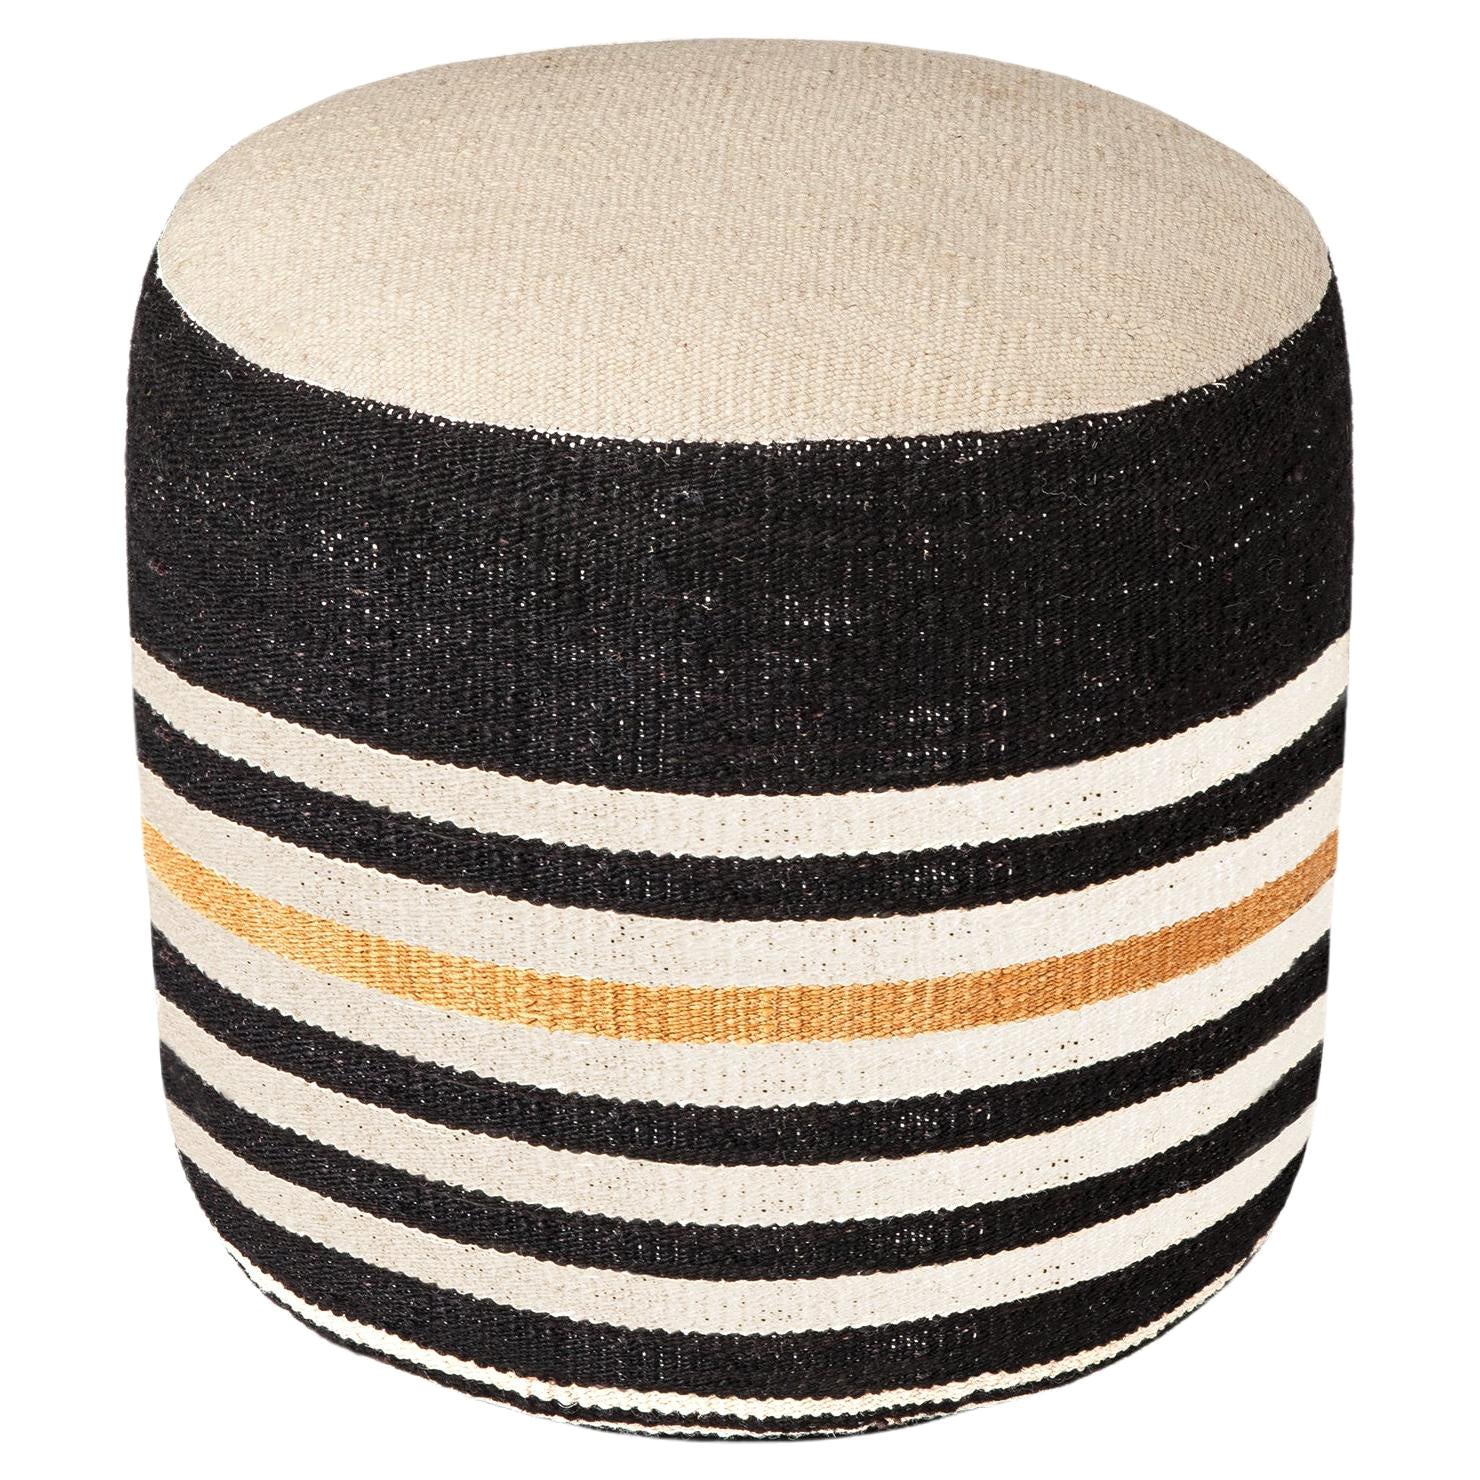 'Kilim 2' Pouf by Nani Marquina and Marcos Catalán for Nanimarquina For Sale